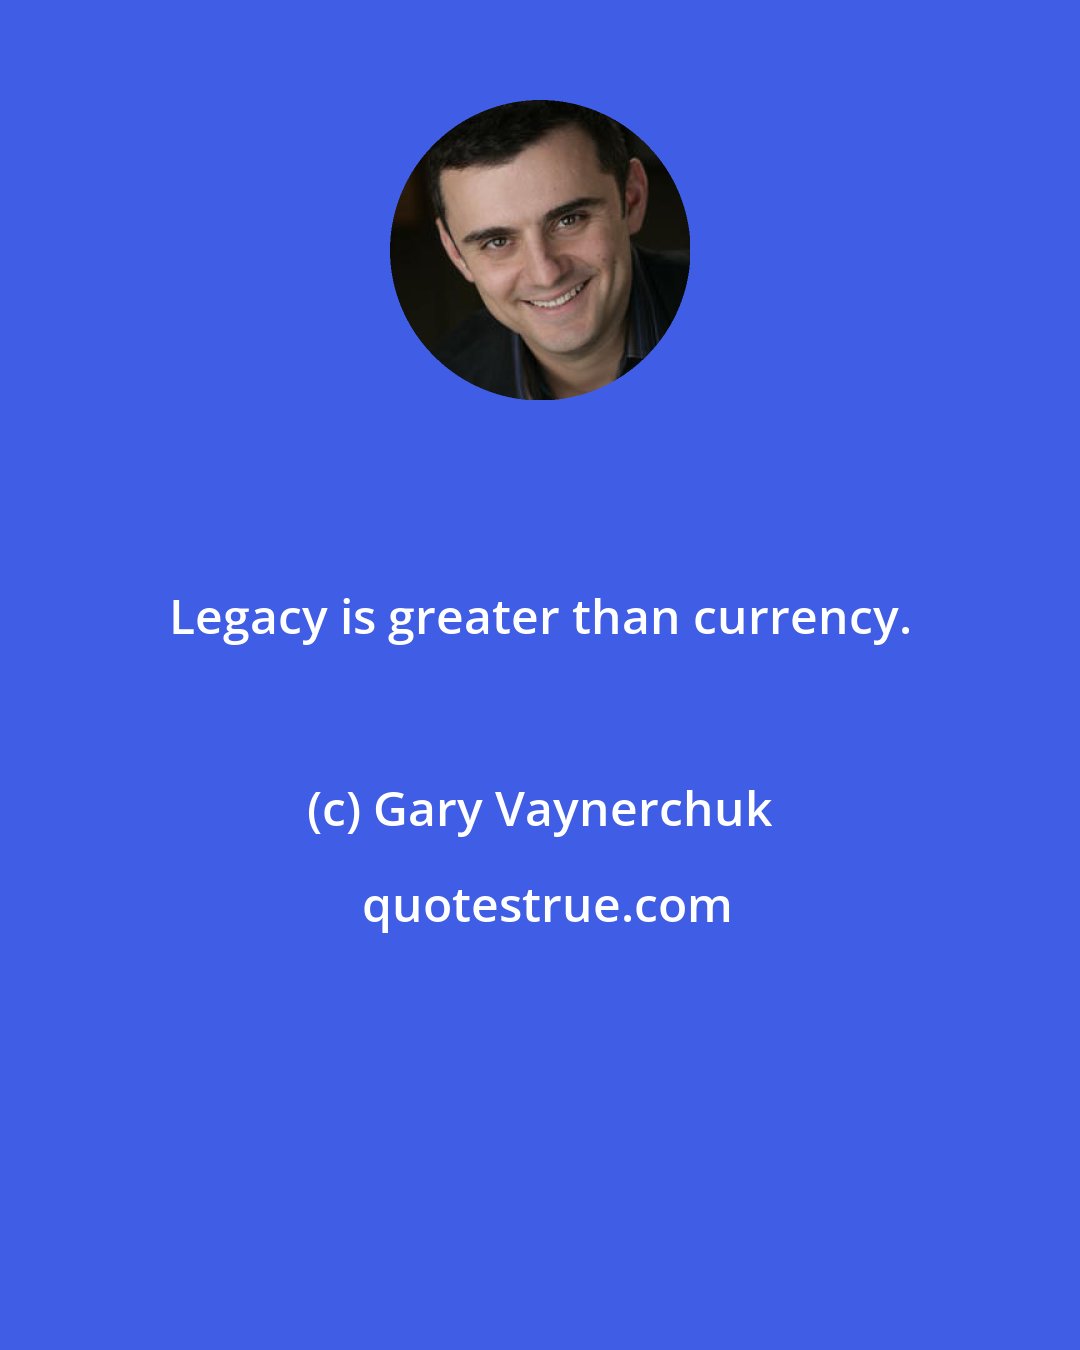 Gary Vaynerchuk: Legacy is greater than currency.